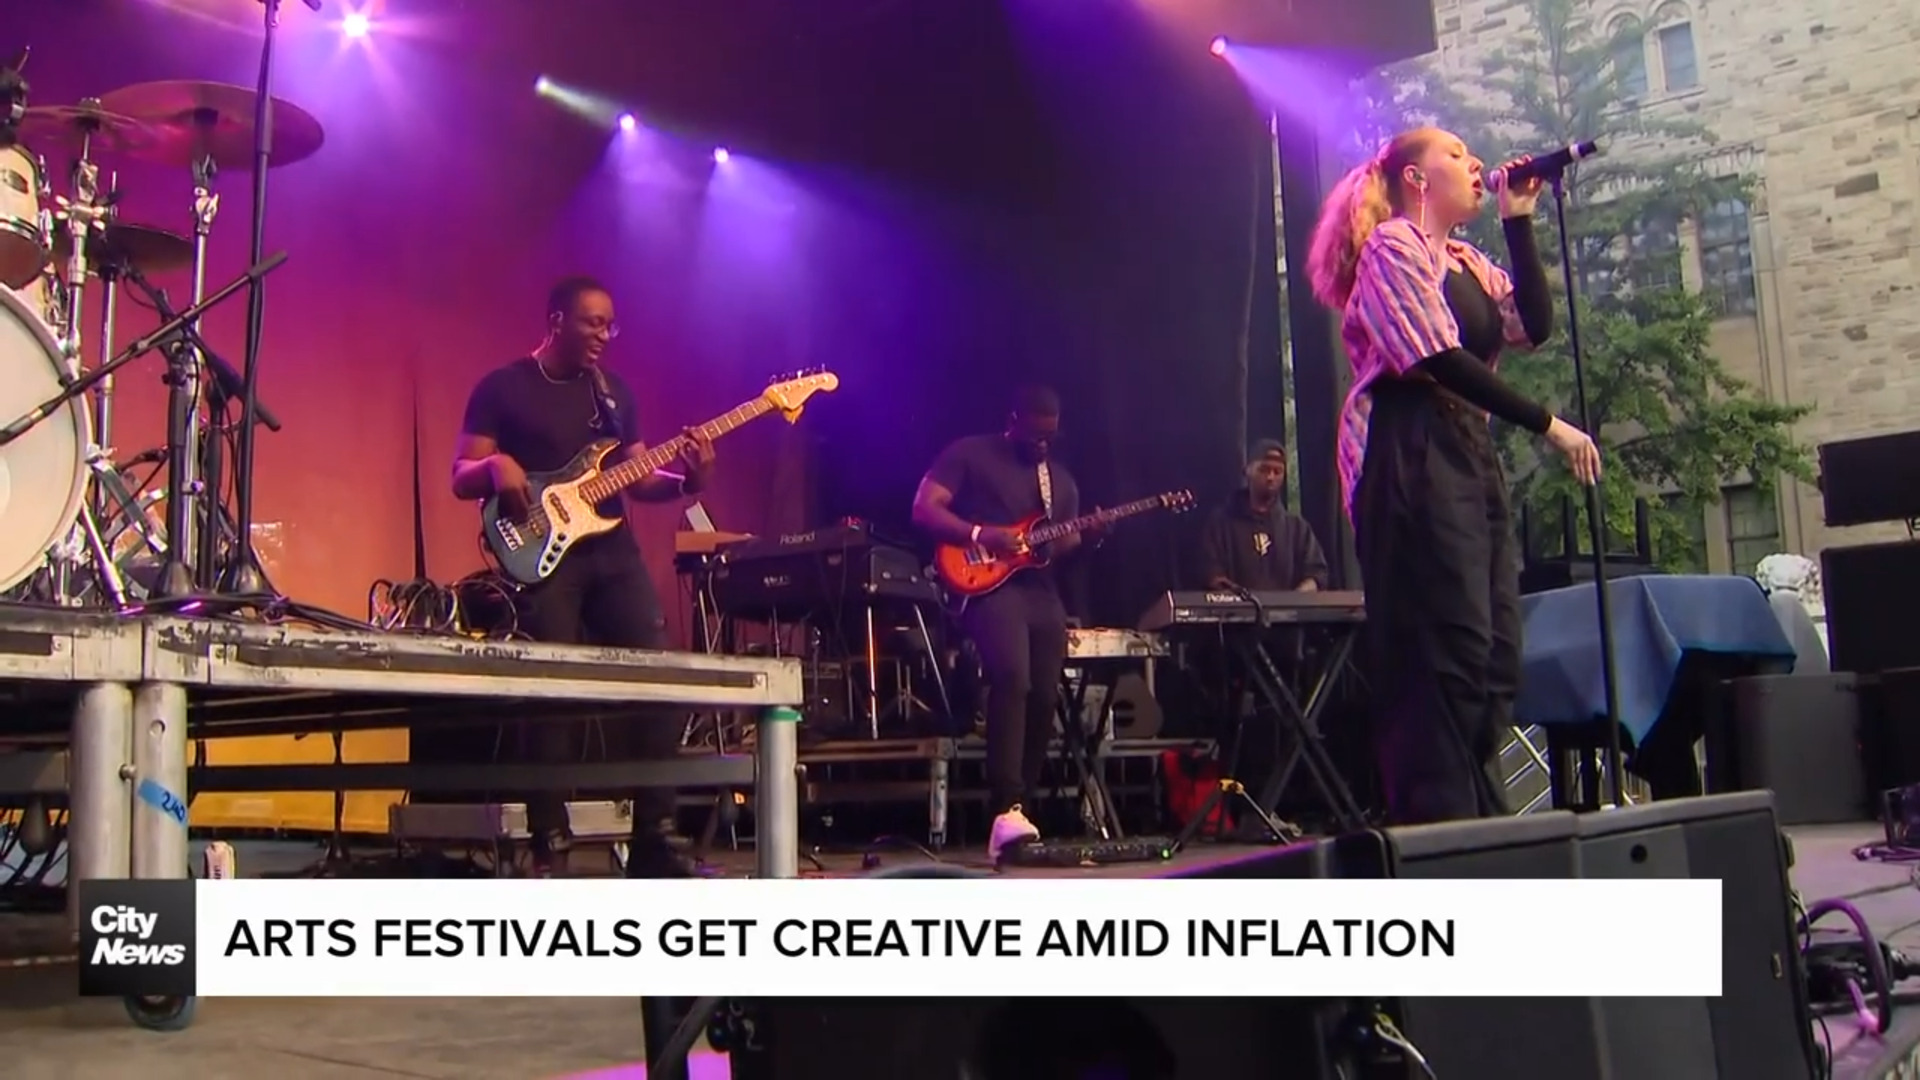 Arts festivals get creative to deal with inflation